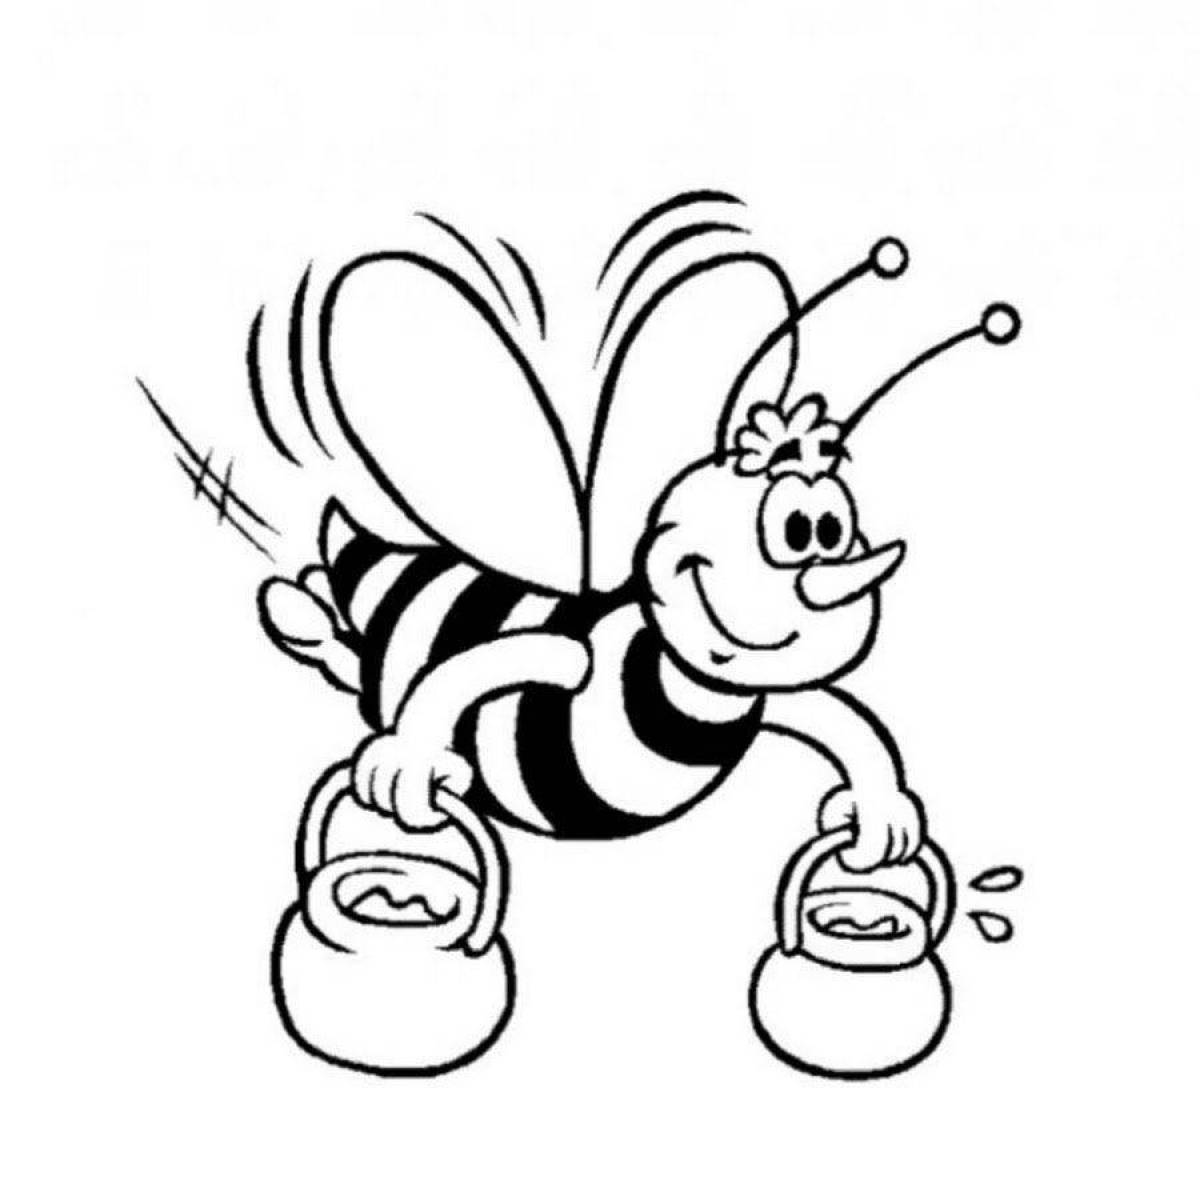 Animated beekeeper coloring page